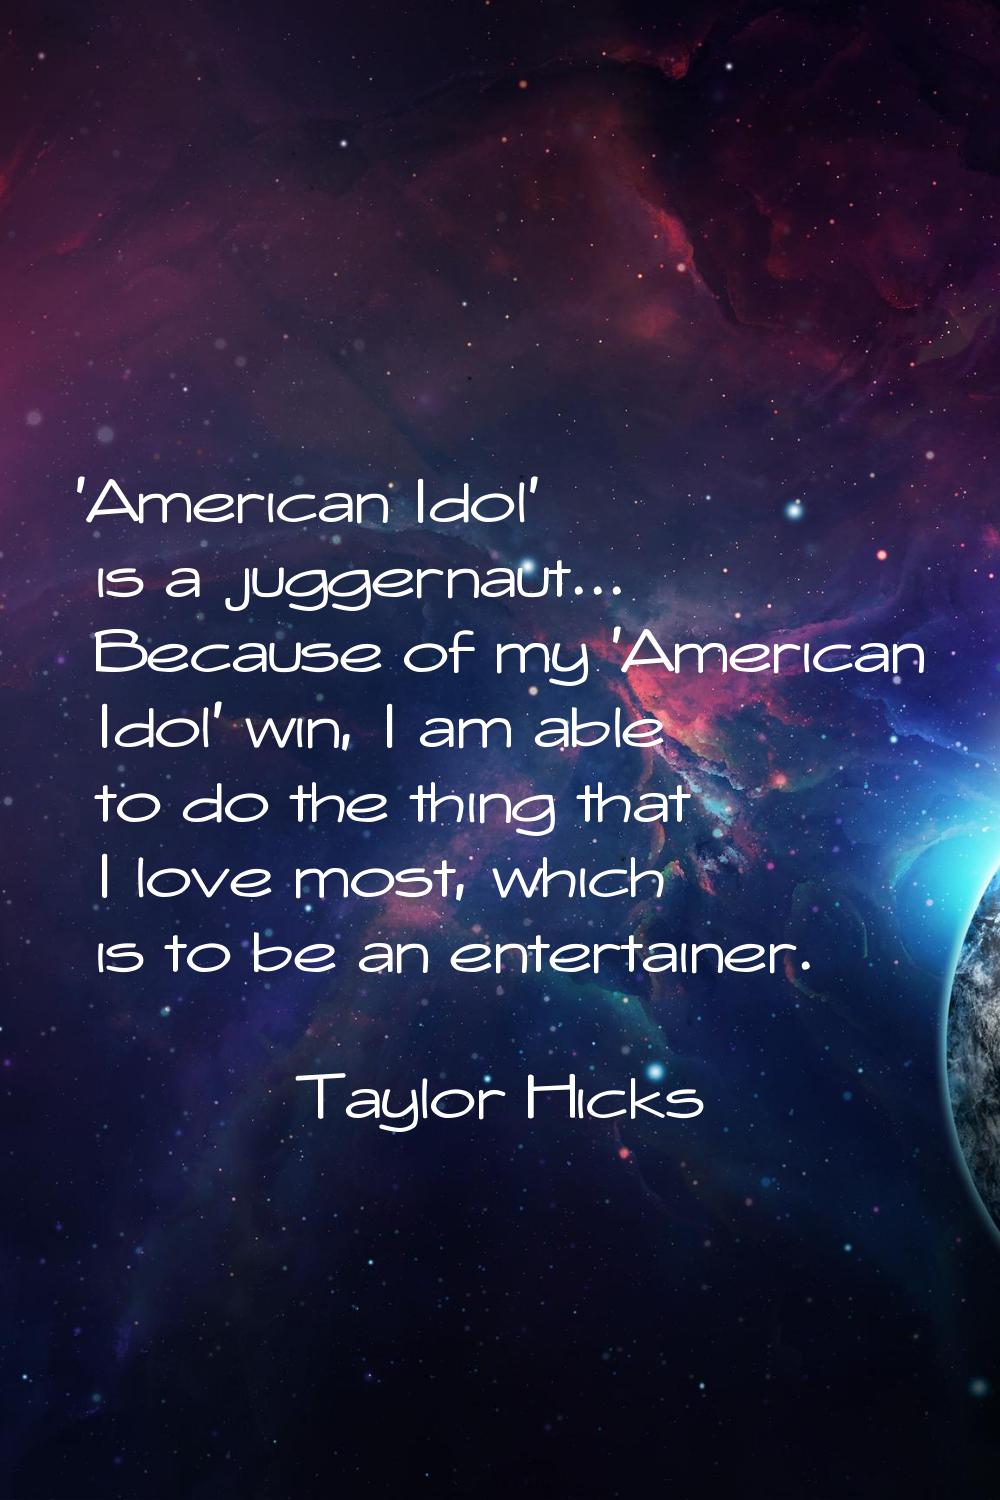 'American Idol' is a juggernaut... Because of my 'American Idol' win, I am able to do the thing tha